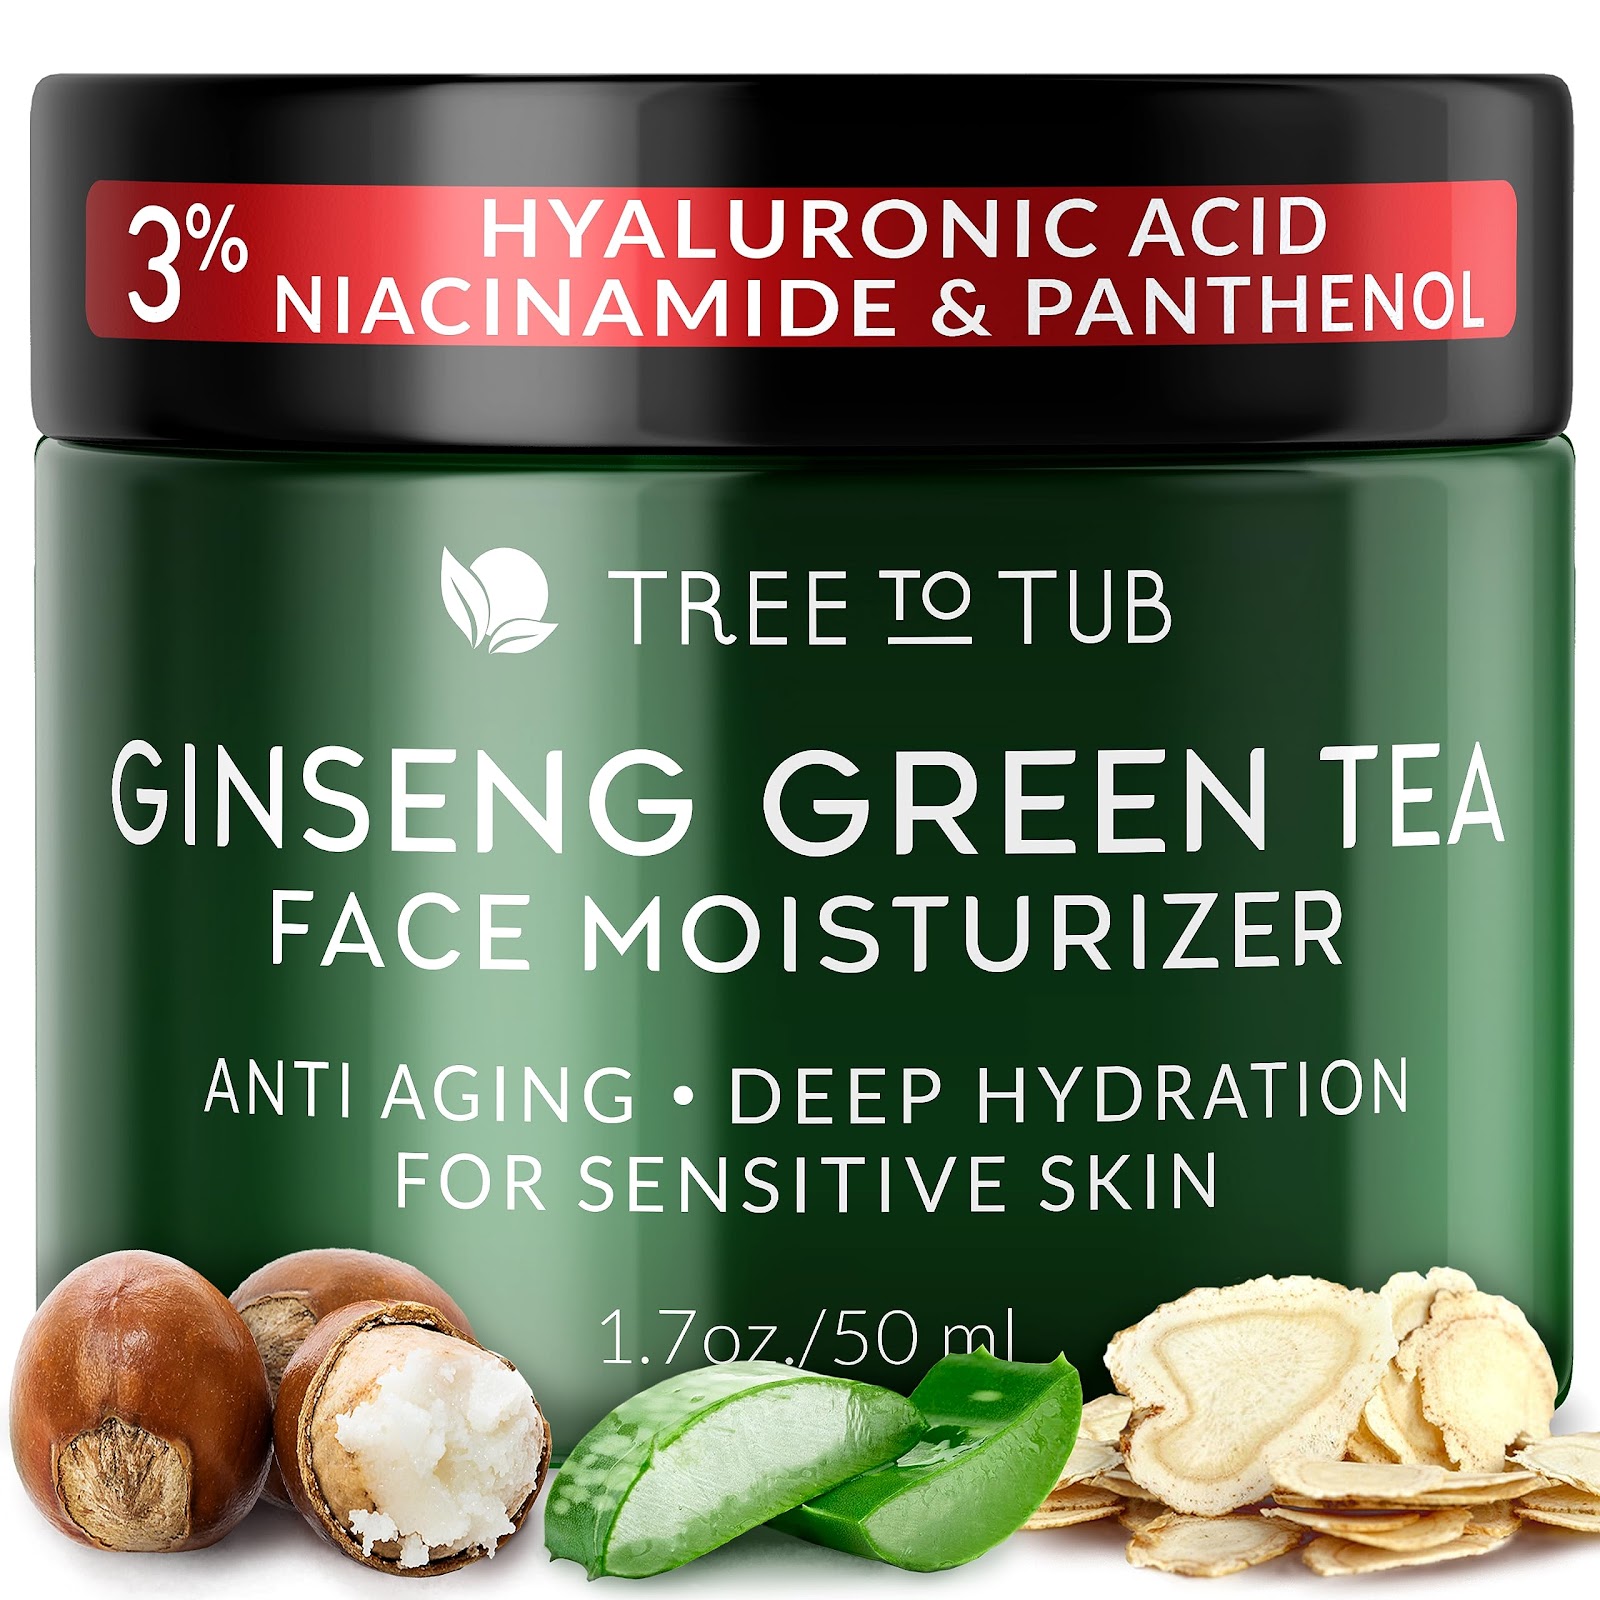 Tree to Tub Hydrating Face Moisturizer